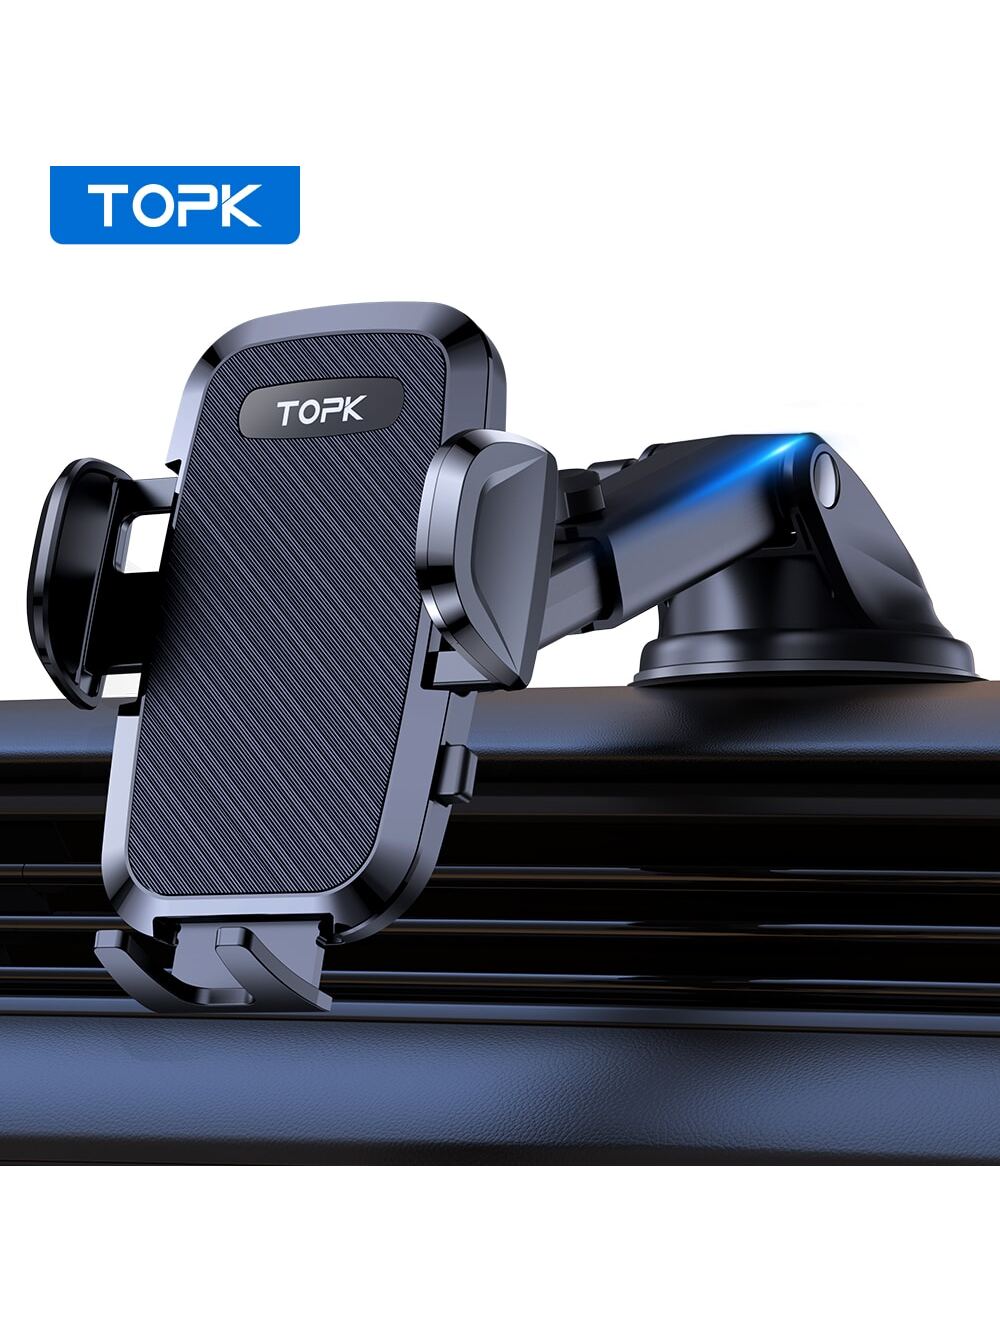 TOPK Phone Stand Holder For Car Mount Automobile Cell Phone Holder Car Mount Compatible With IPhone Universal Dashboard Mount Fit For All Smartphones